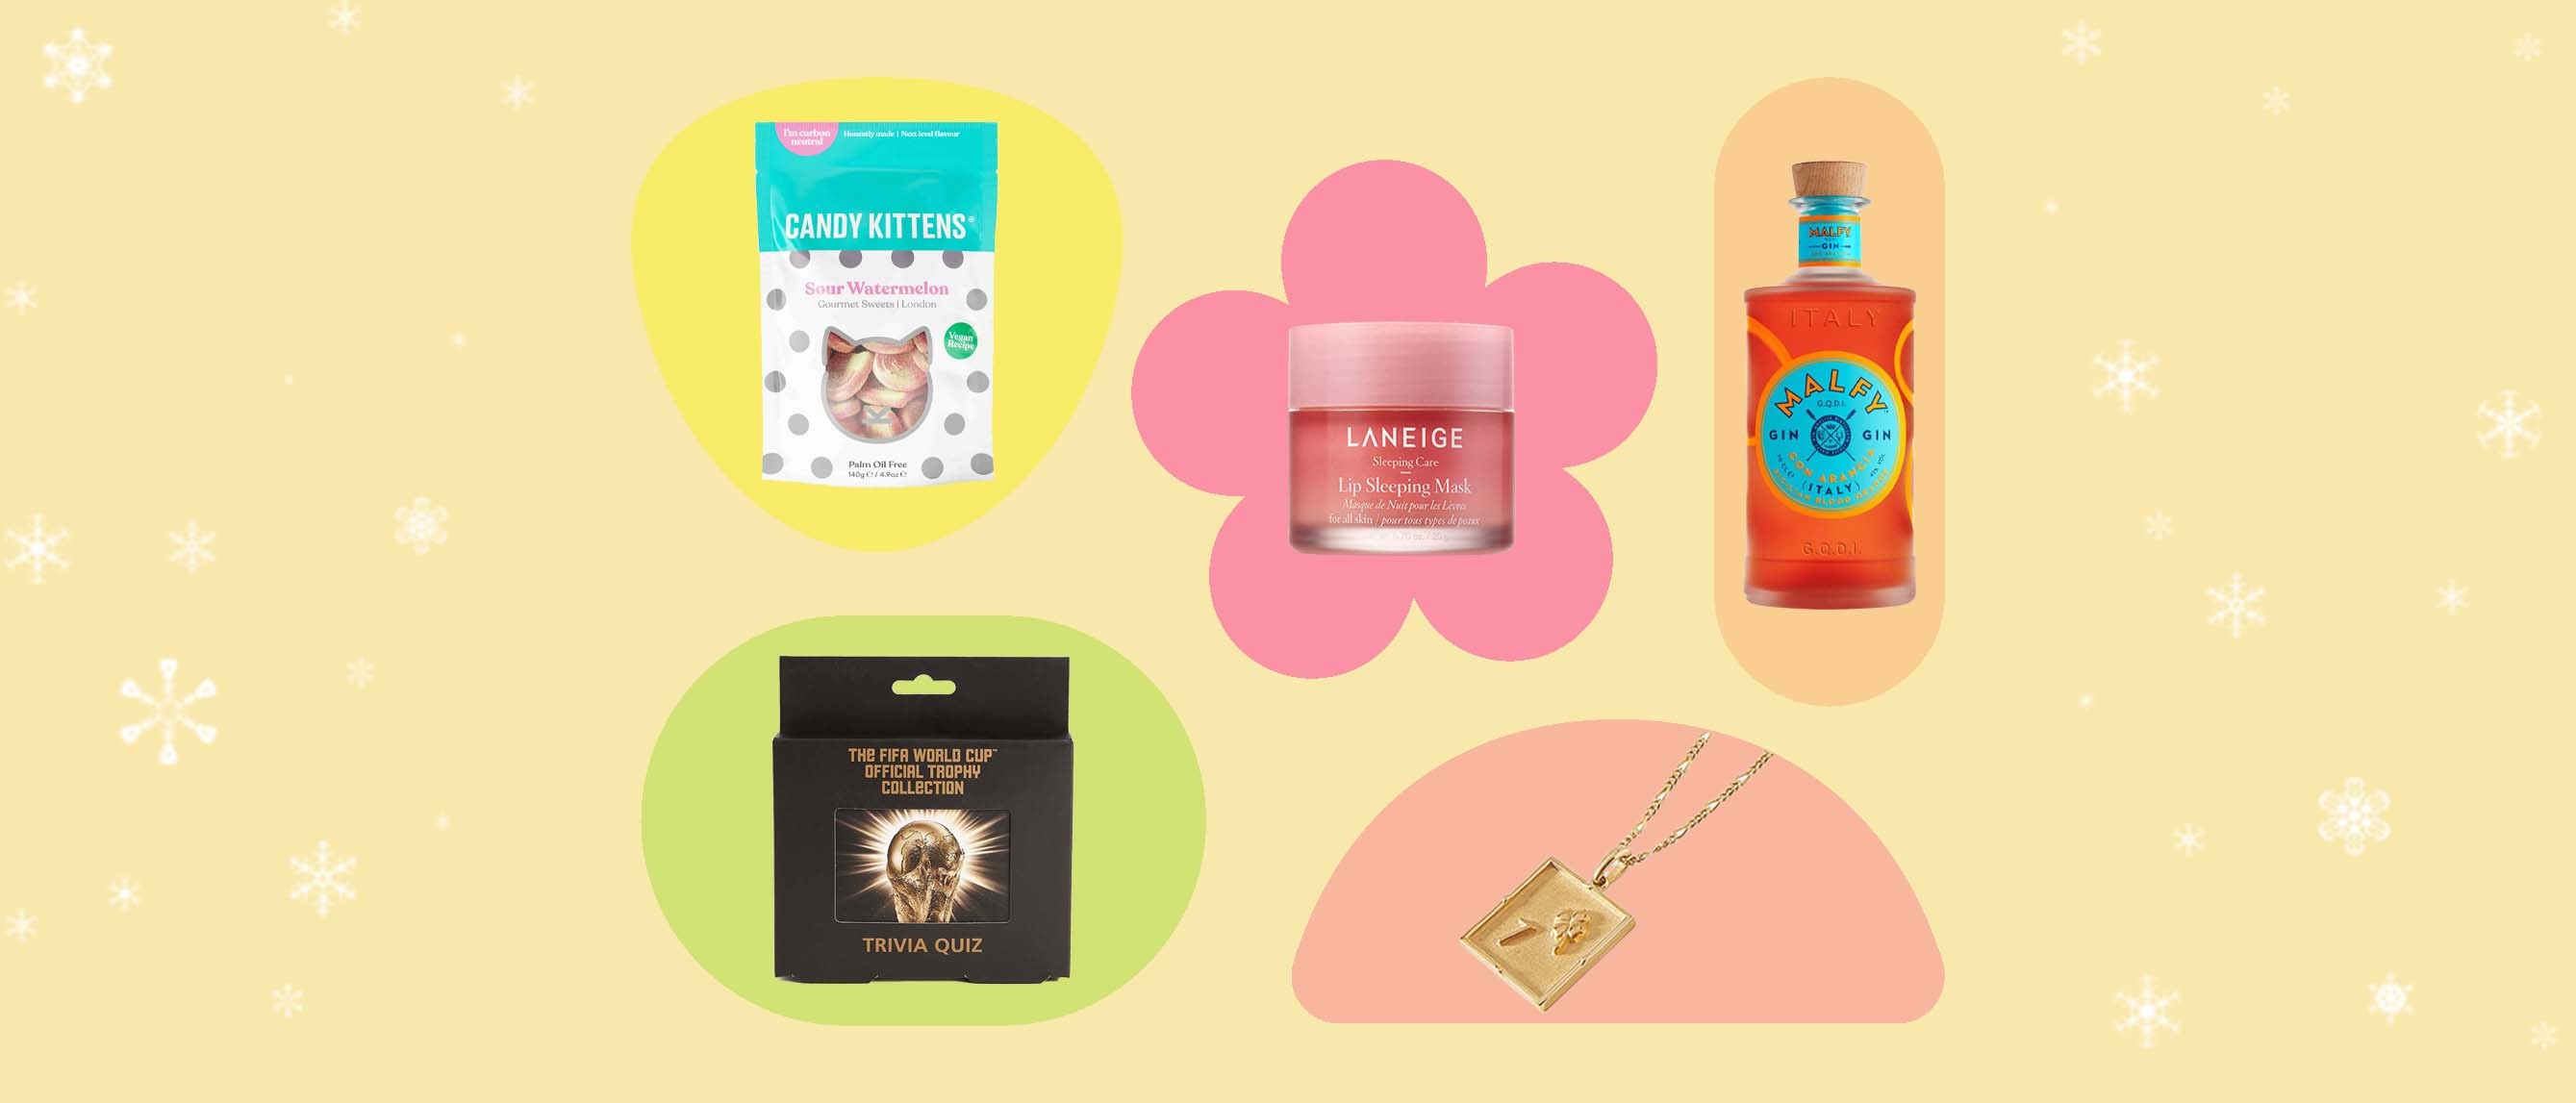 20 stocking fillers they’re going to love this Christmas